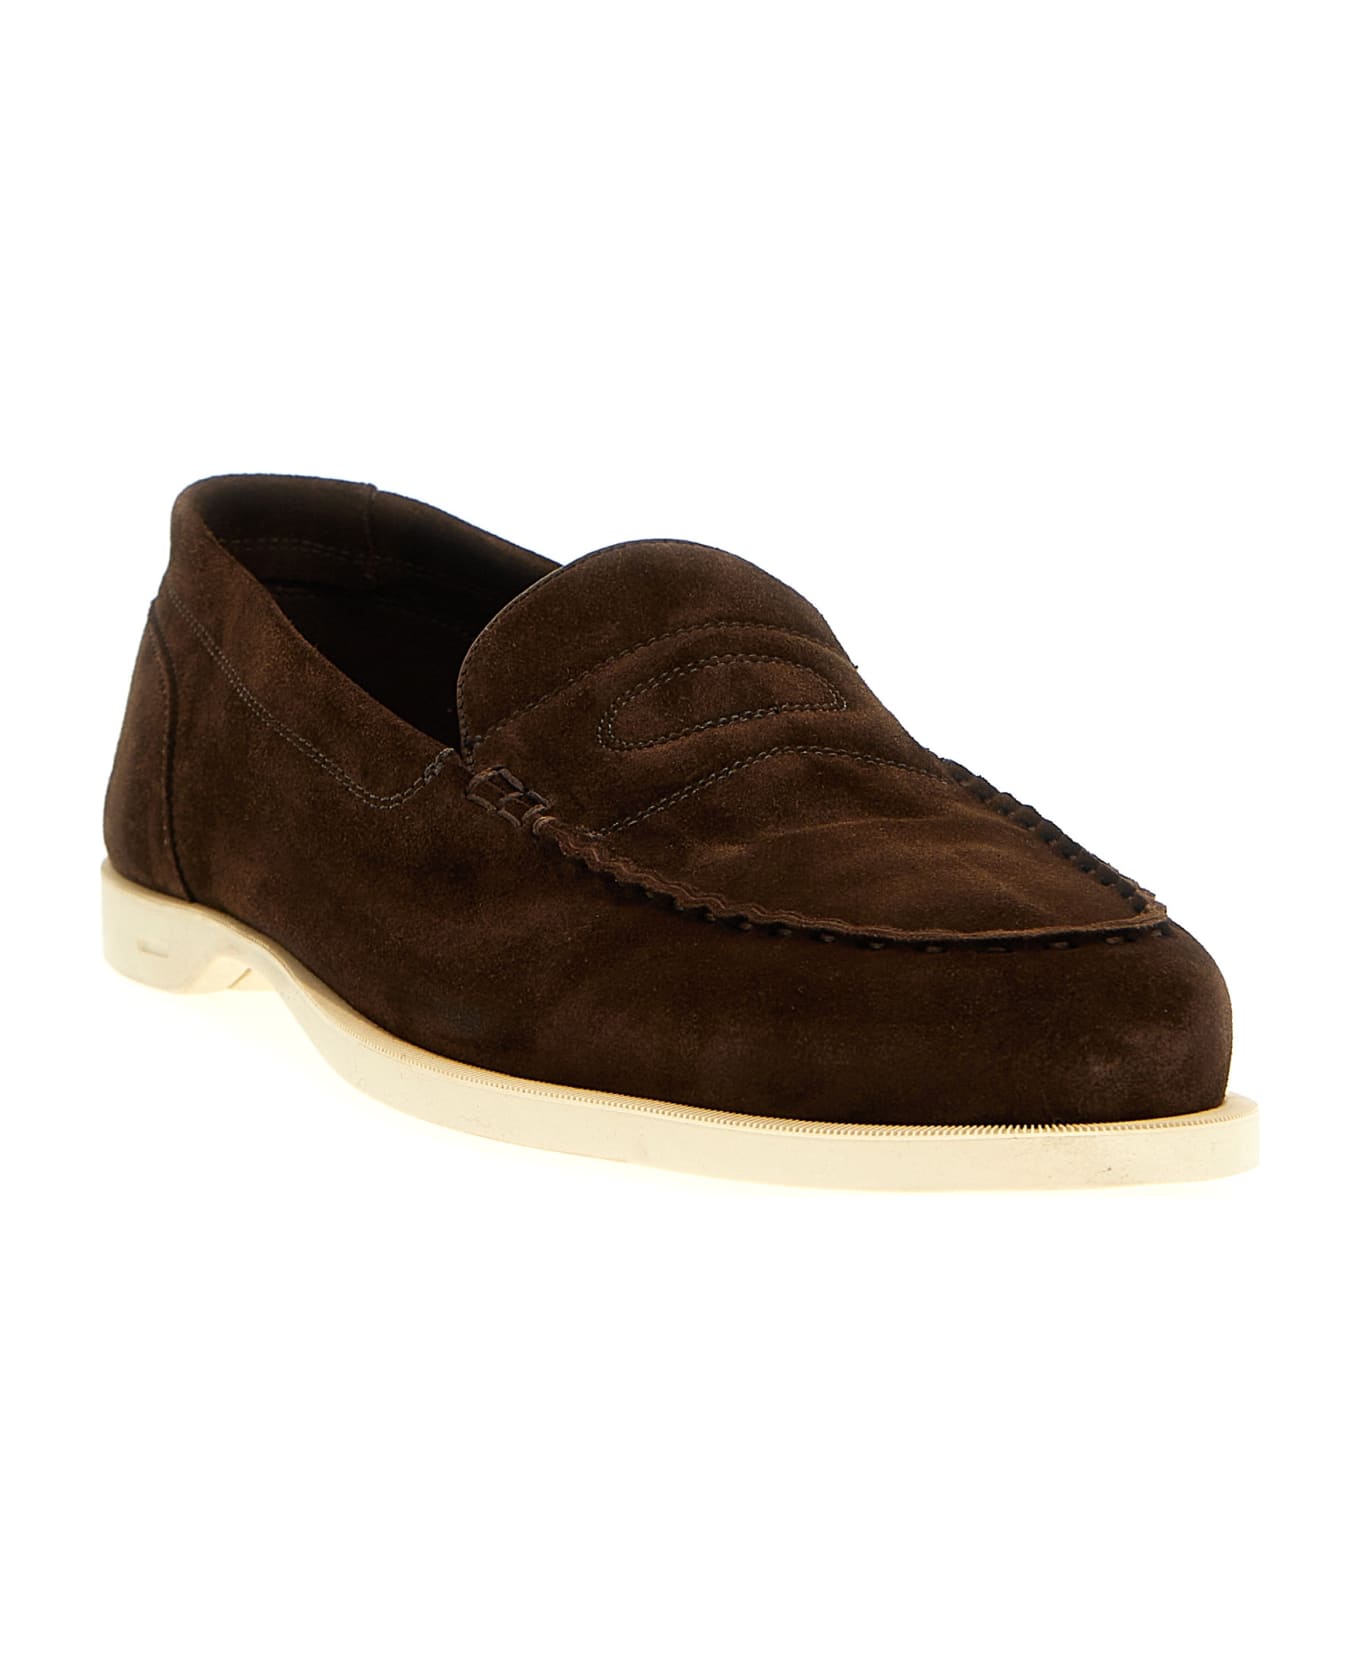 John Lobb 'pace' Loafers - Brown